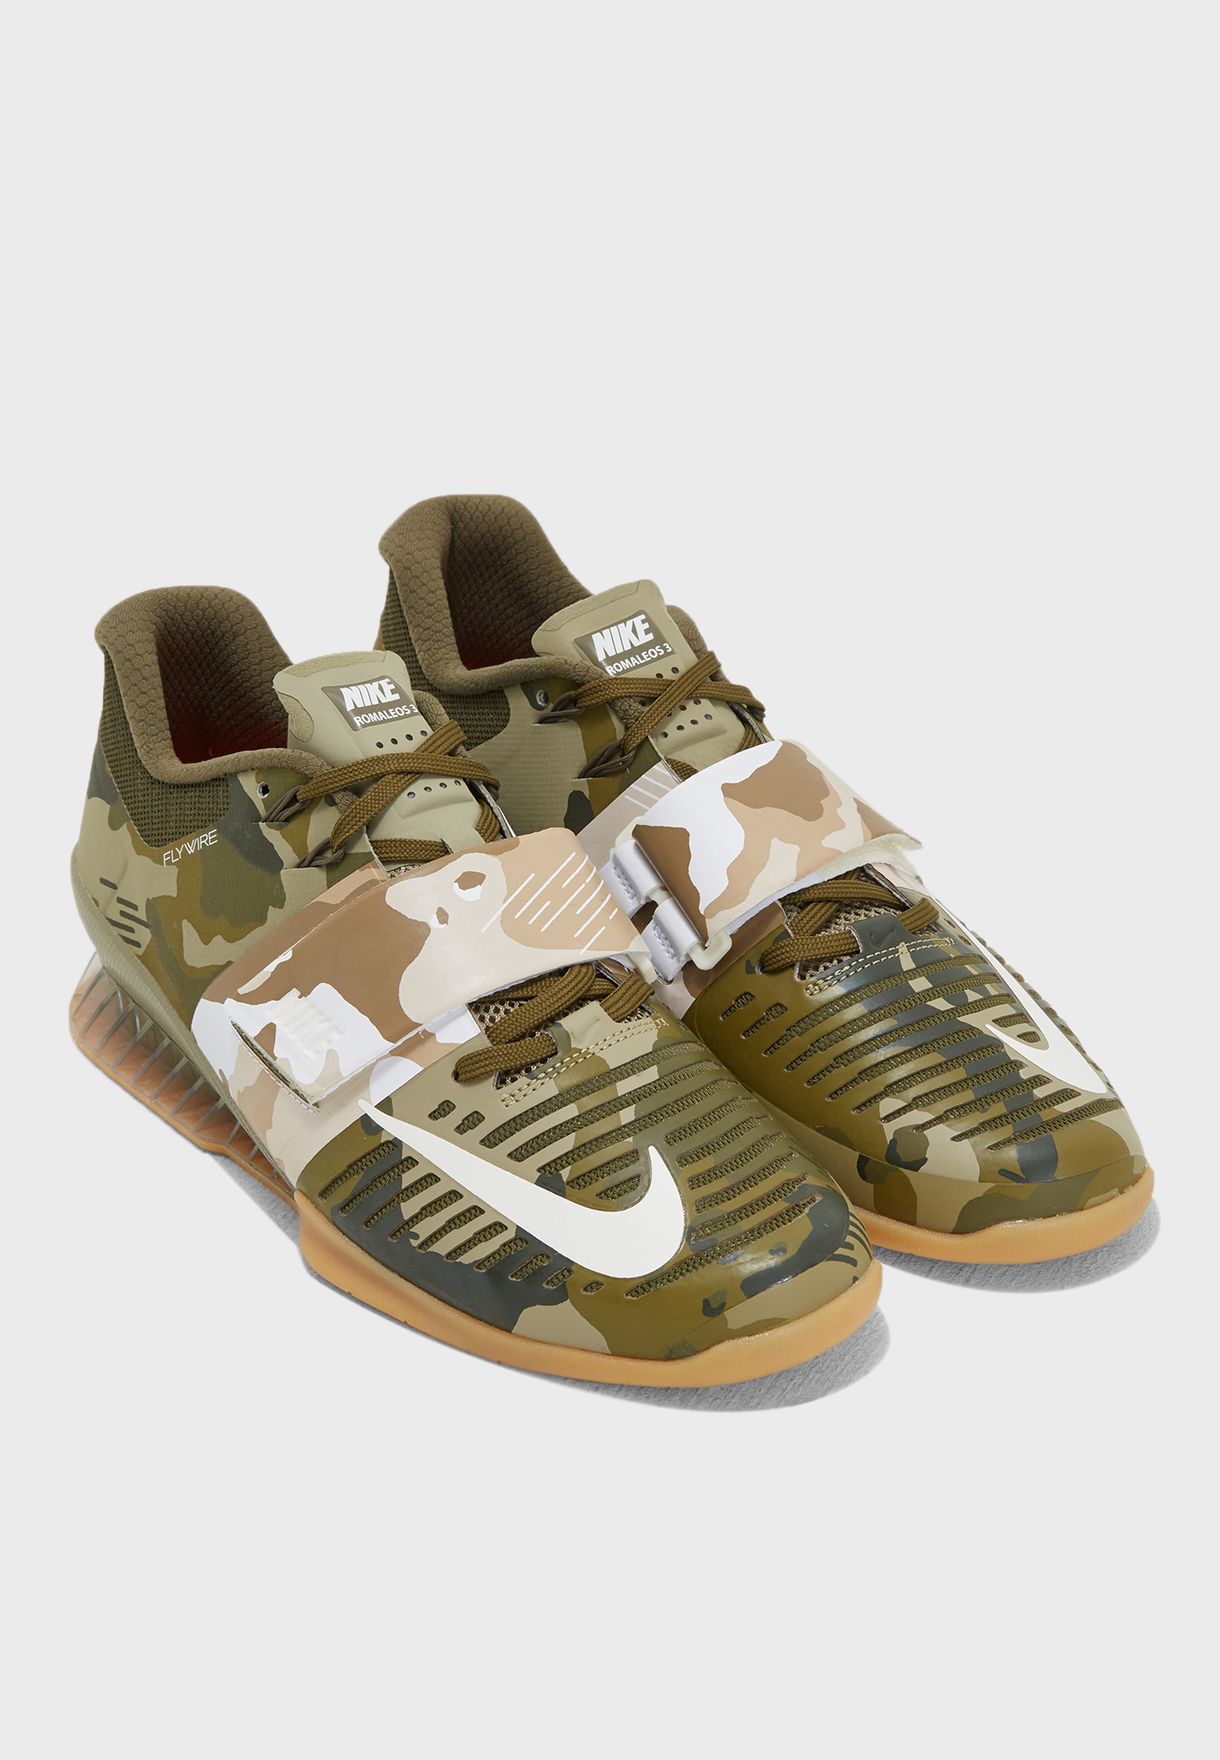 nike weightlifting shoes camo